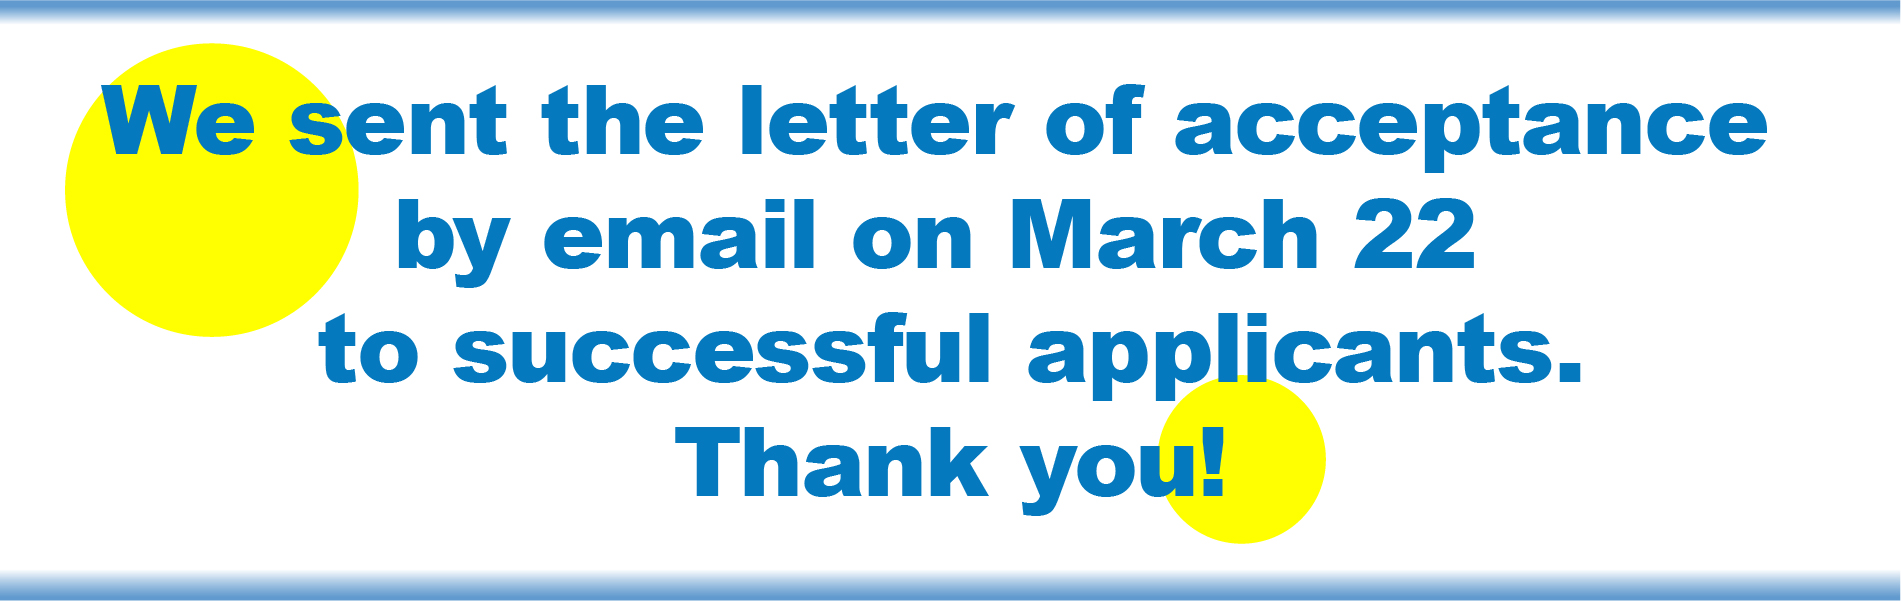 We sent the letter of acceptance by email on March 22 to successful applicants. Thank you!